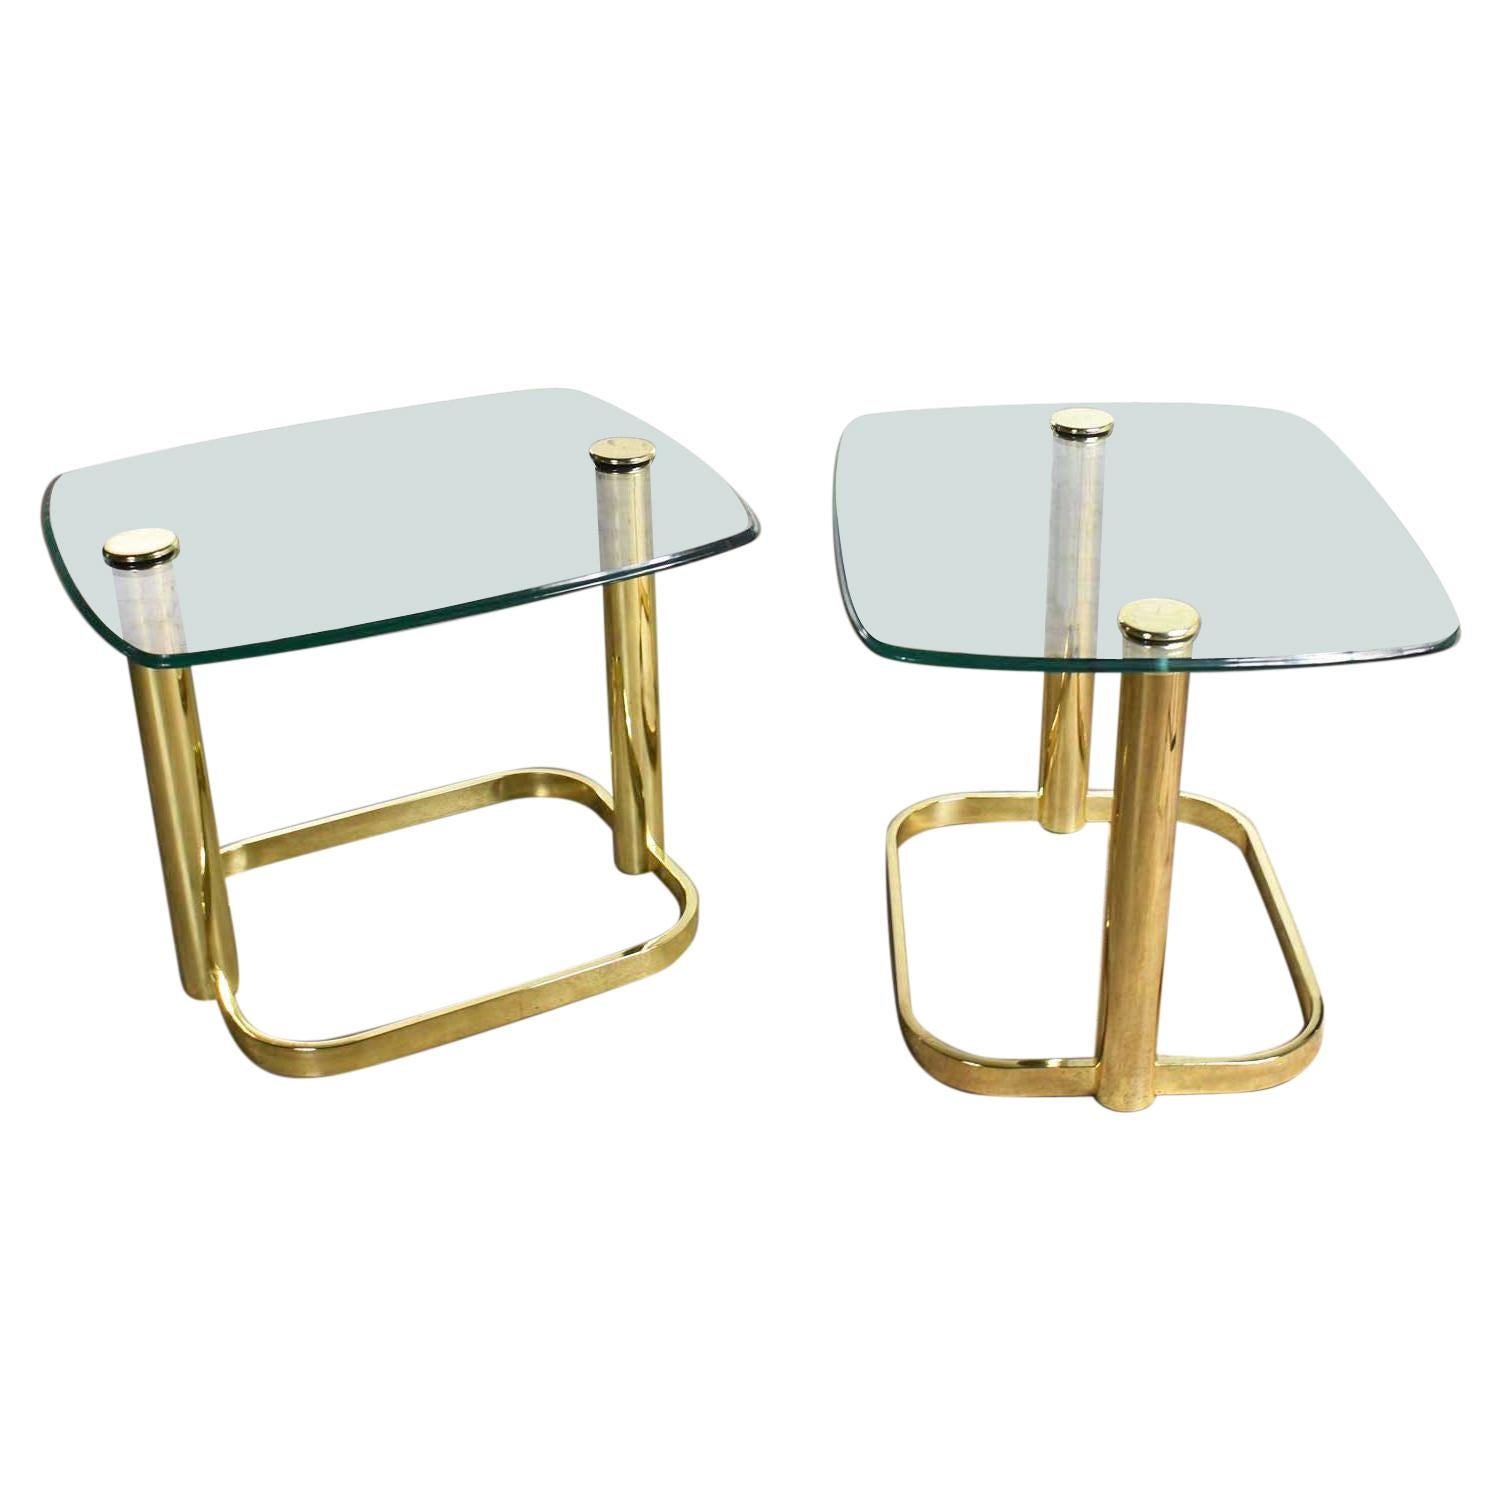 Modern Pair of End Tables Brass Plate & Glass Attr Rosen for The Pace Collection